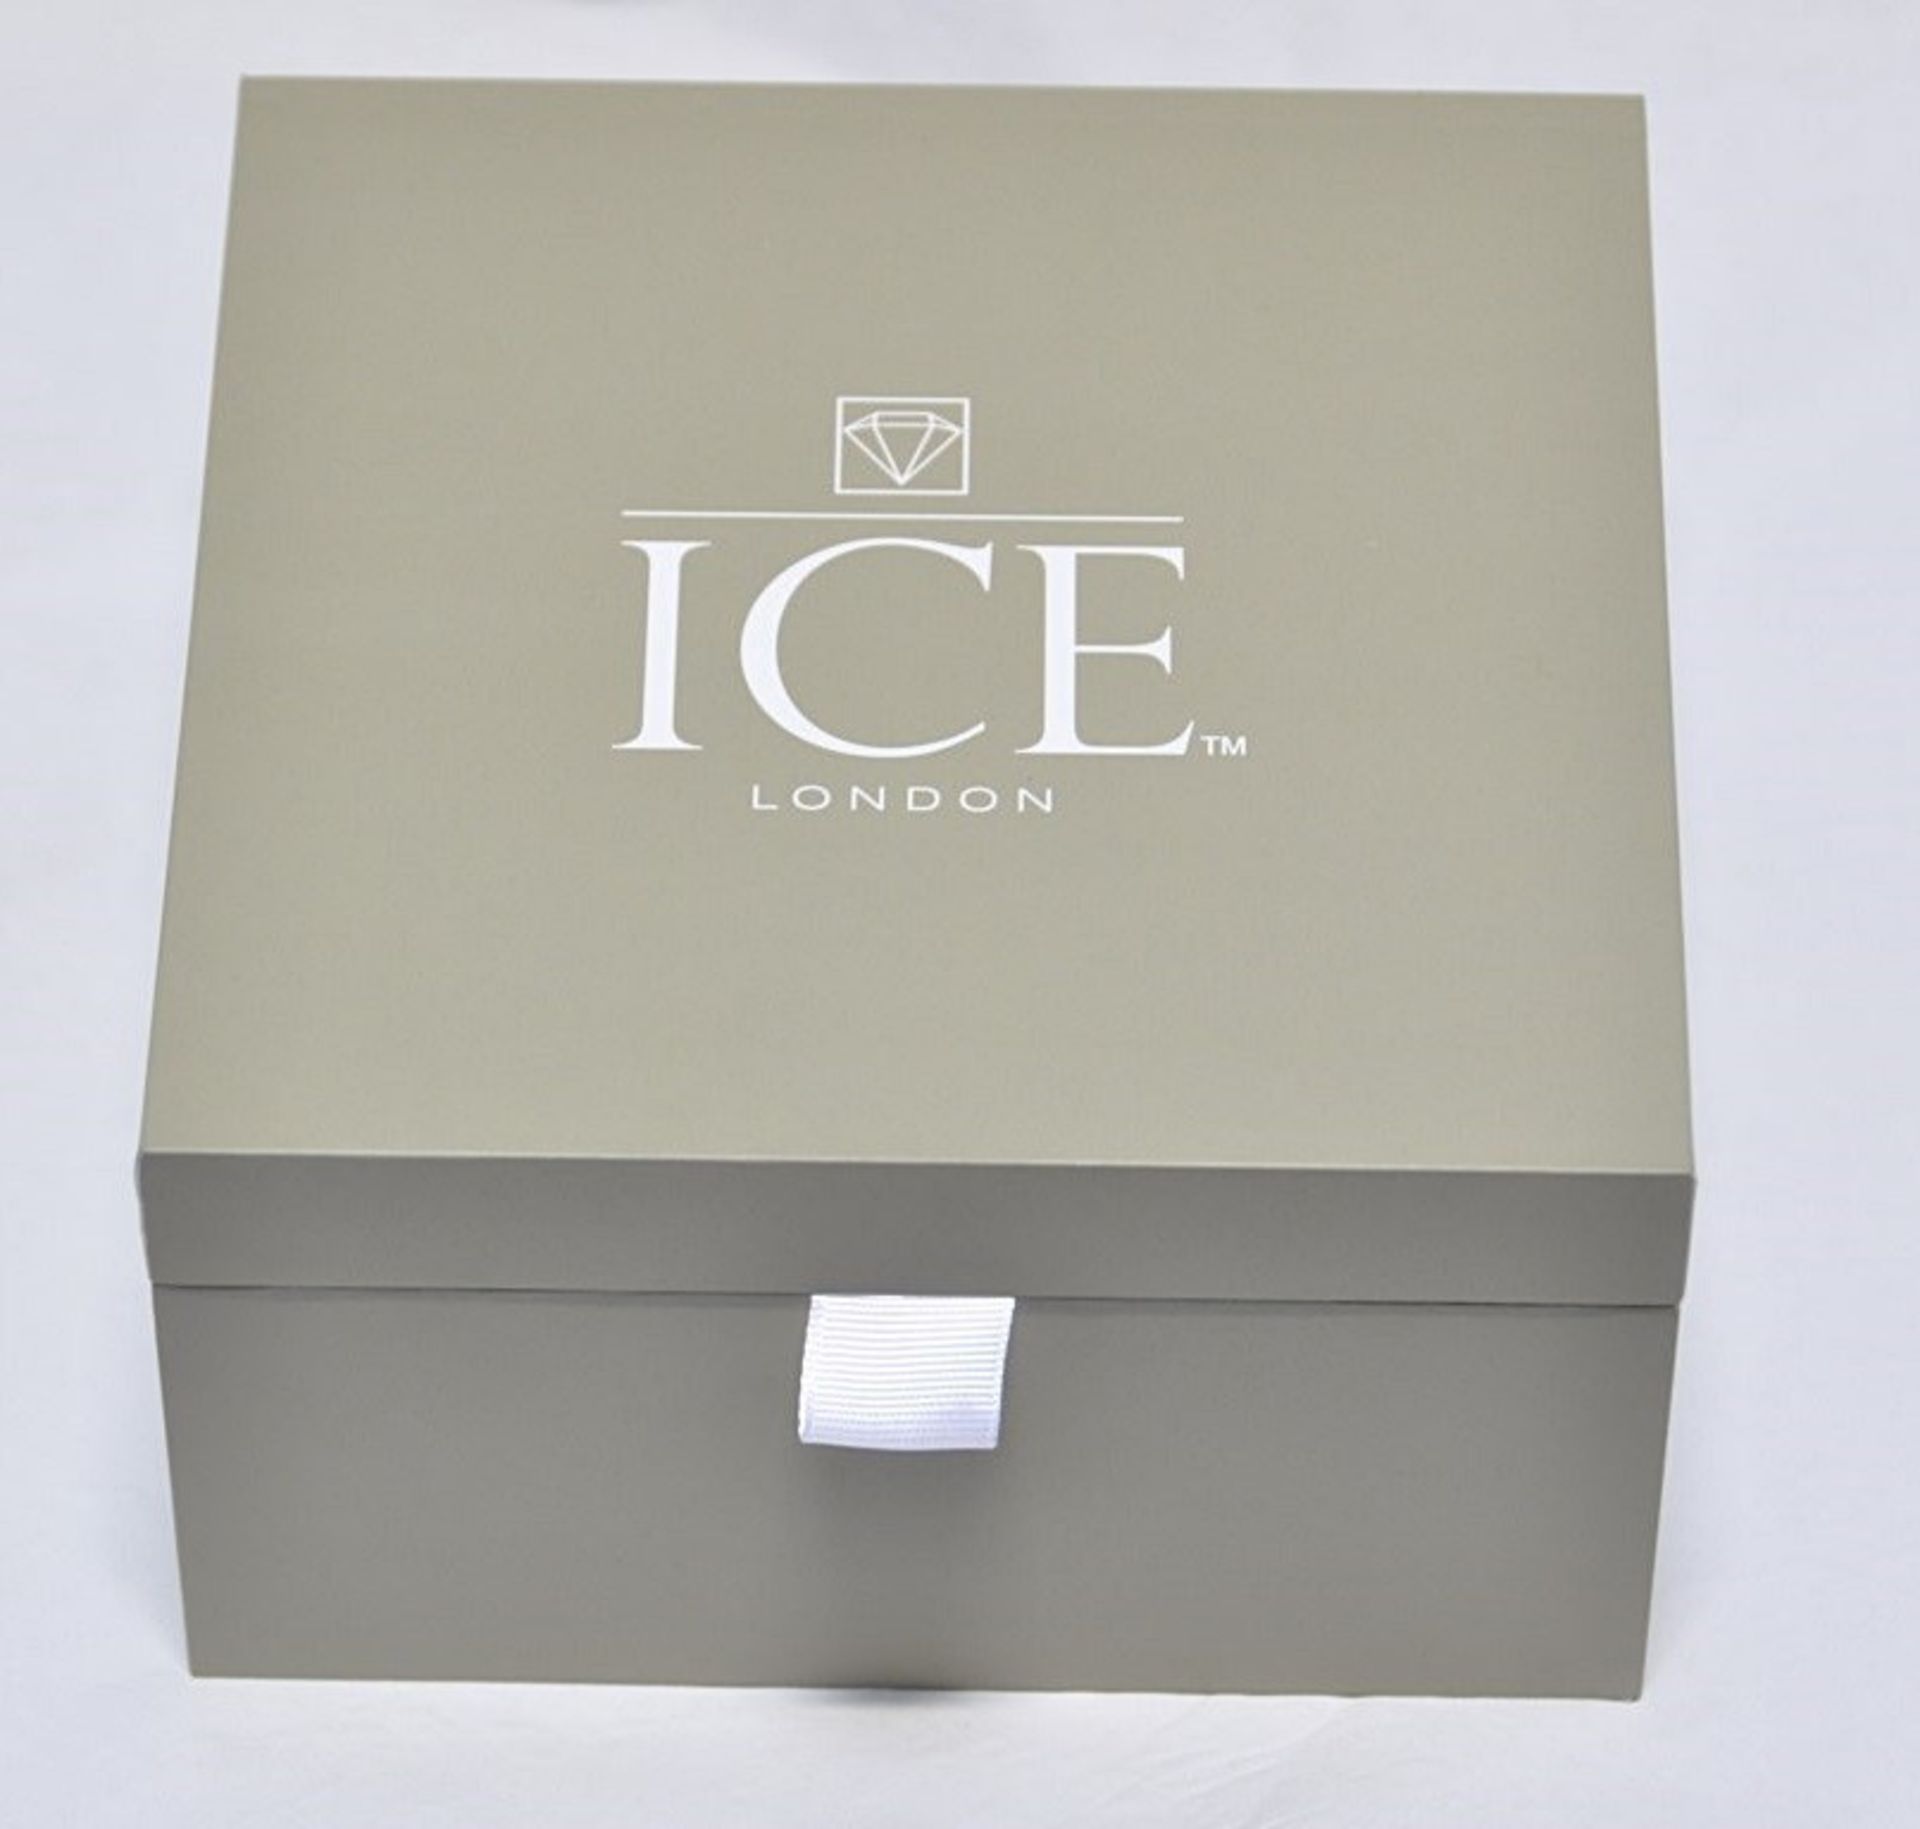 24 x Genuine Fine Leather Travel Card / Credit Card Holders by ICE London - EGW-6007-PK - Colour: - Image 5 of 6